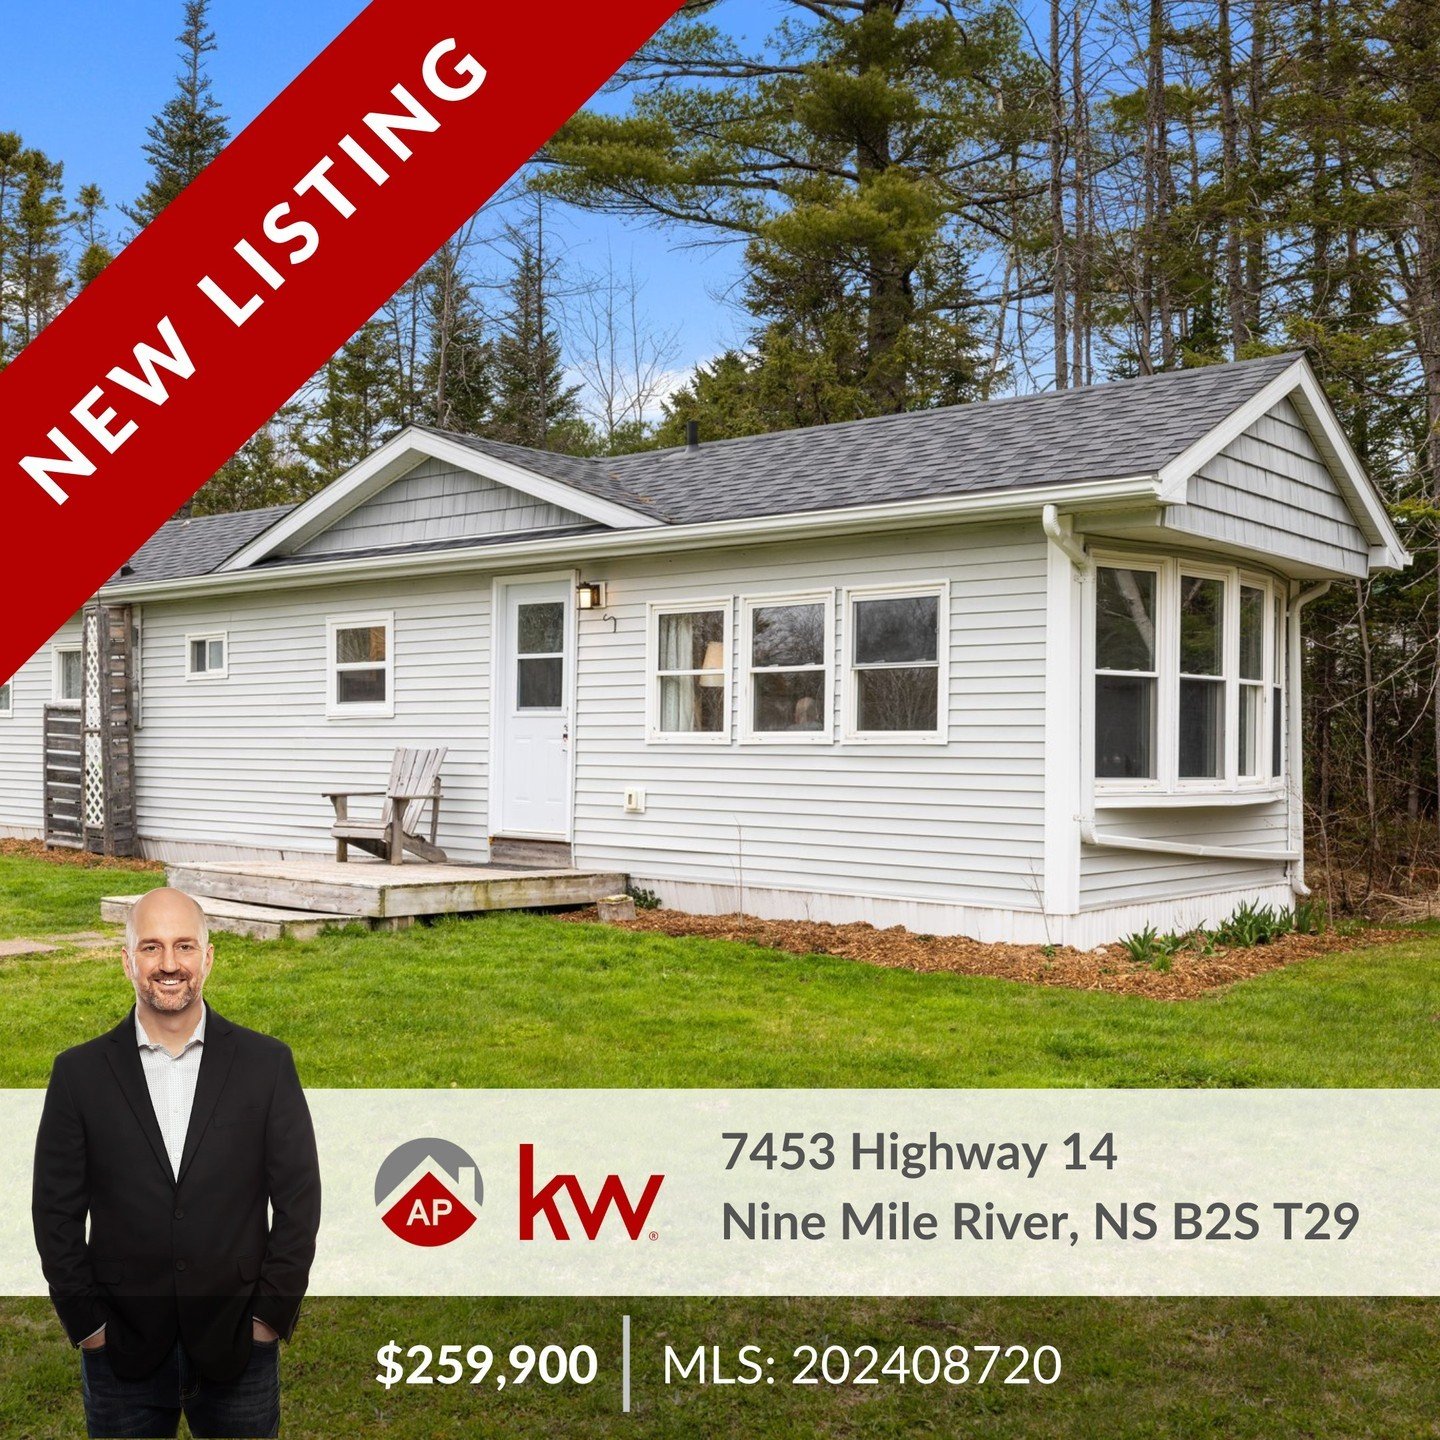 New Listing Alert! 🚨

Welcome to 7453 Highway 14! 

Nestled in the beauty of Nine Mile River, this charming home offers the perfect blend of comfort, privacy, and convenience. Situated on owned land, this property boasts a spacious treed lot, provid